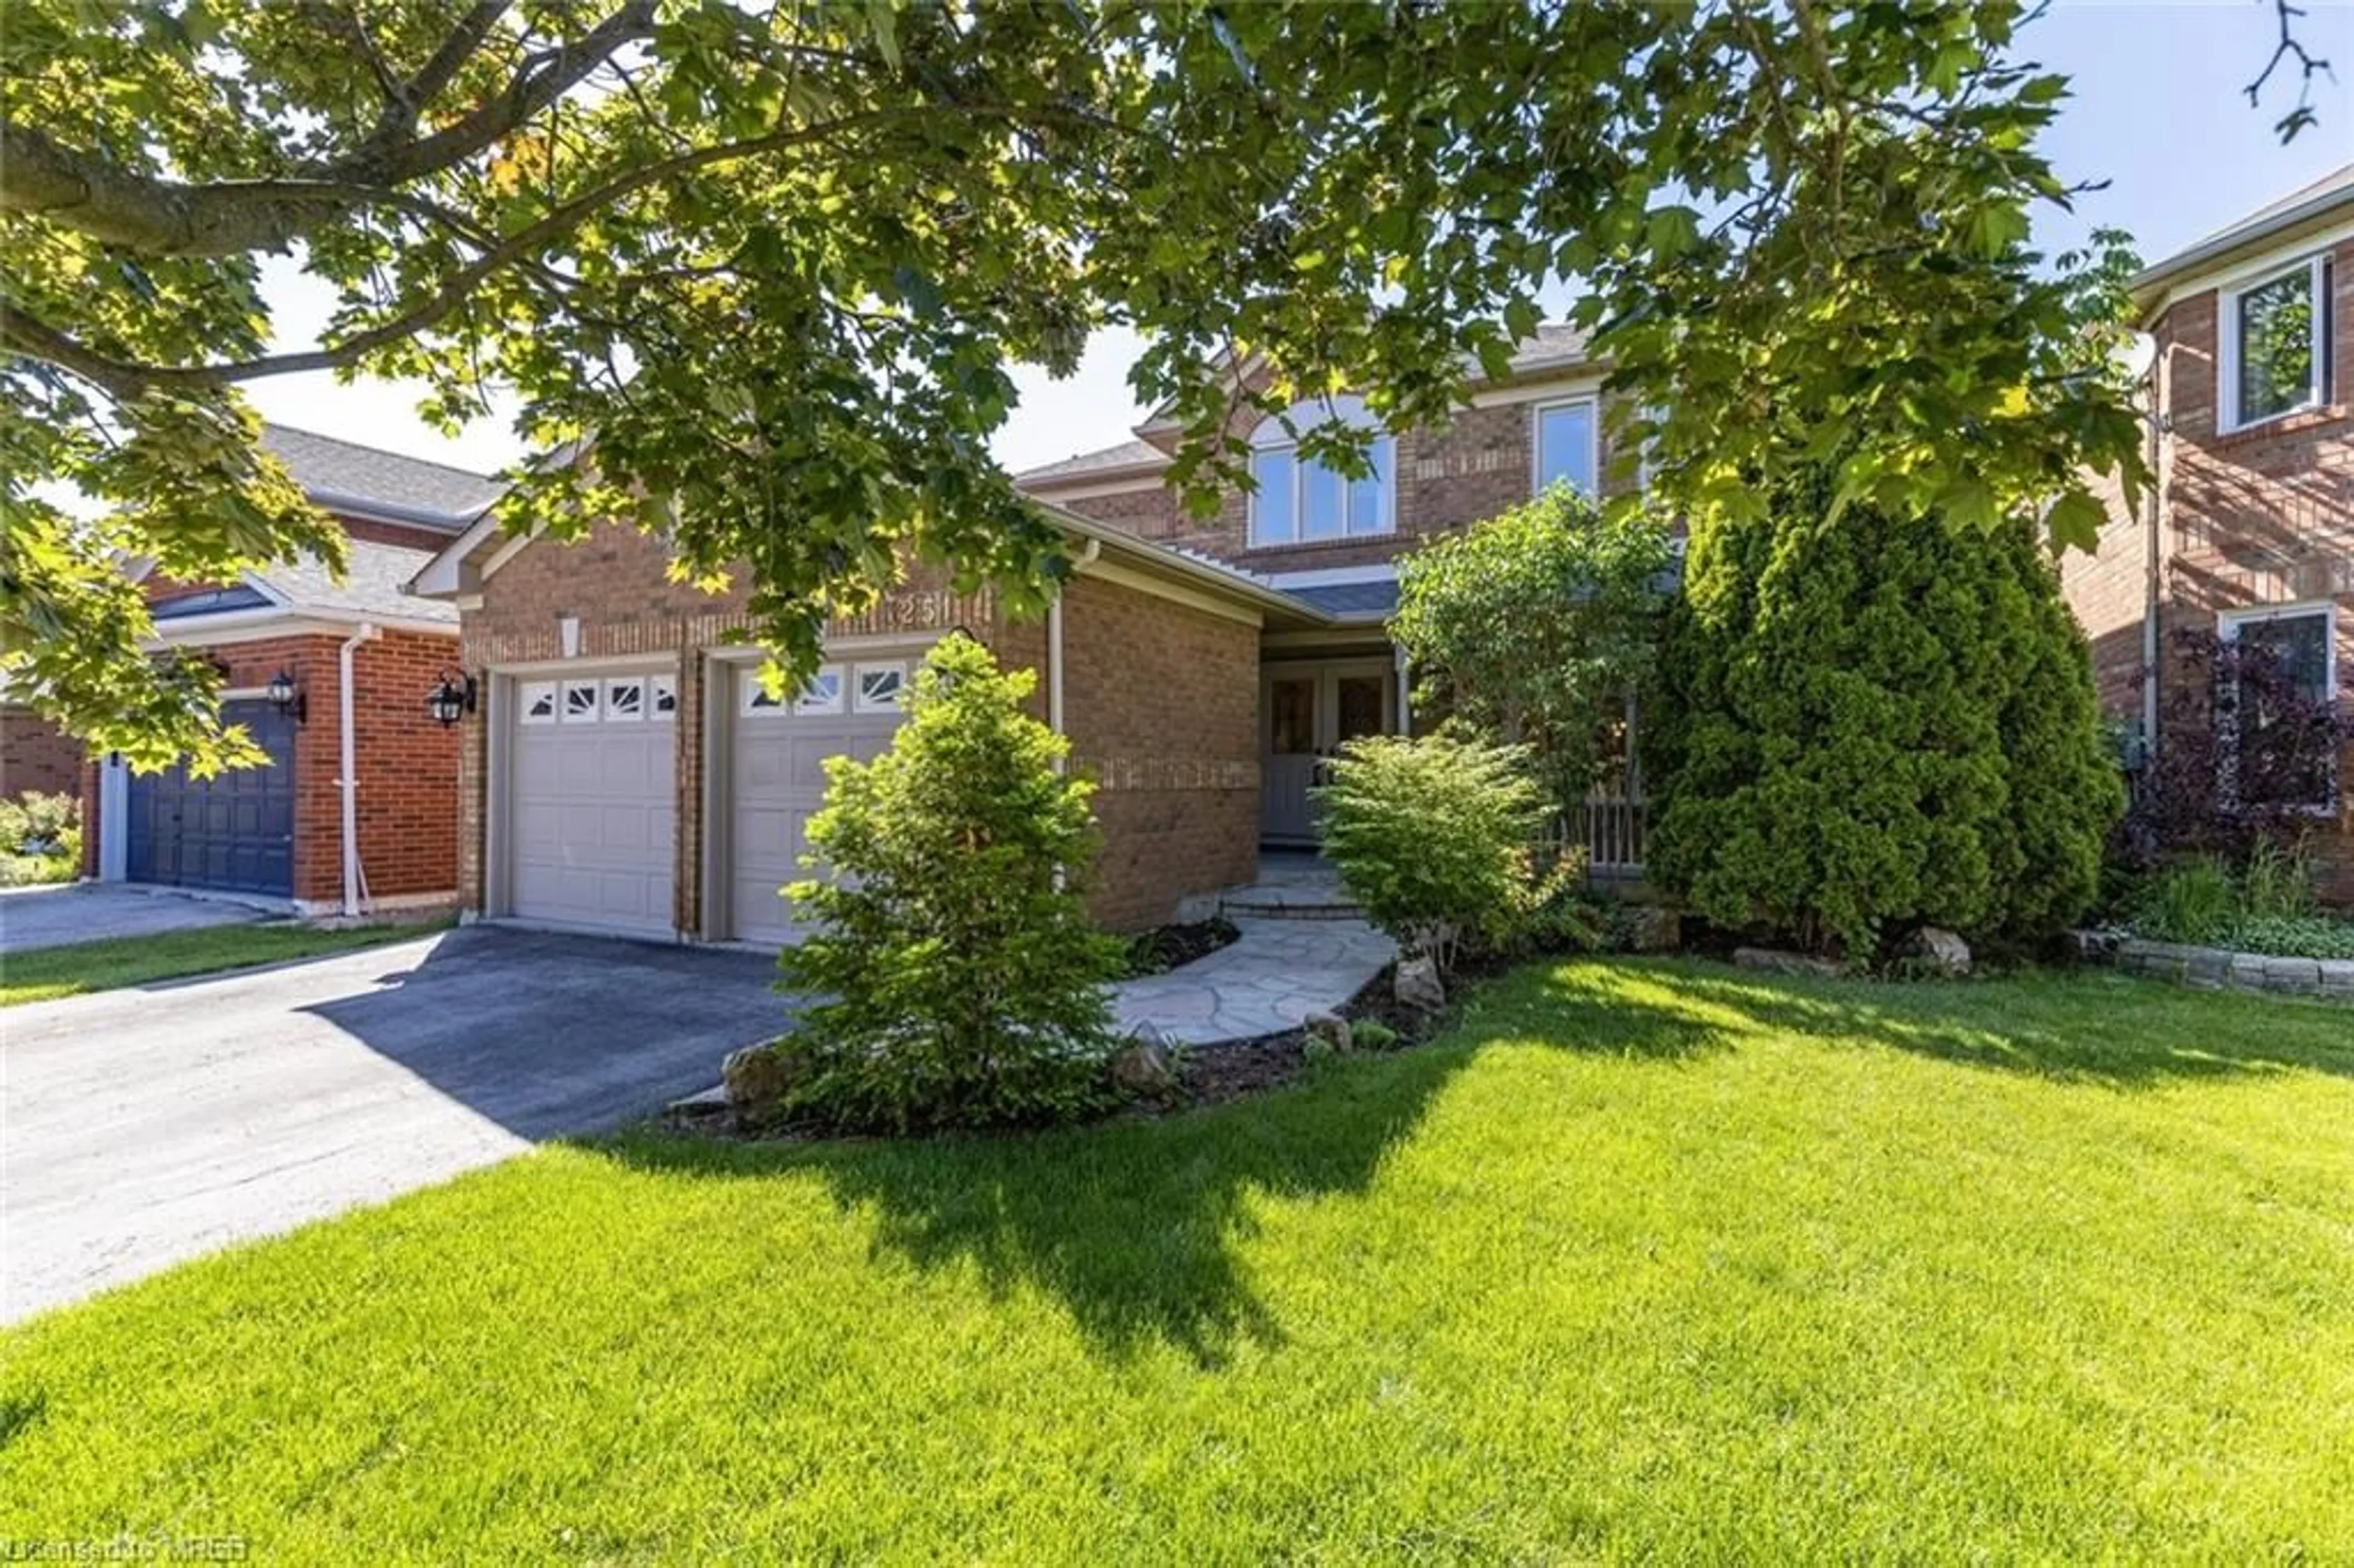 Frontside or backside of a home for 3251 Bloomfield Dr, Mississauga Ontario L5N 6X8